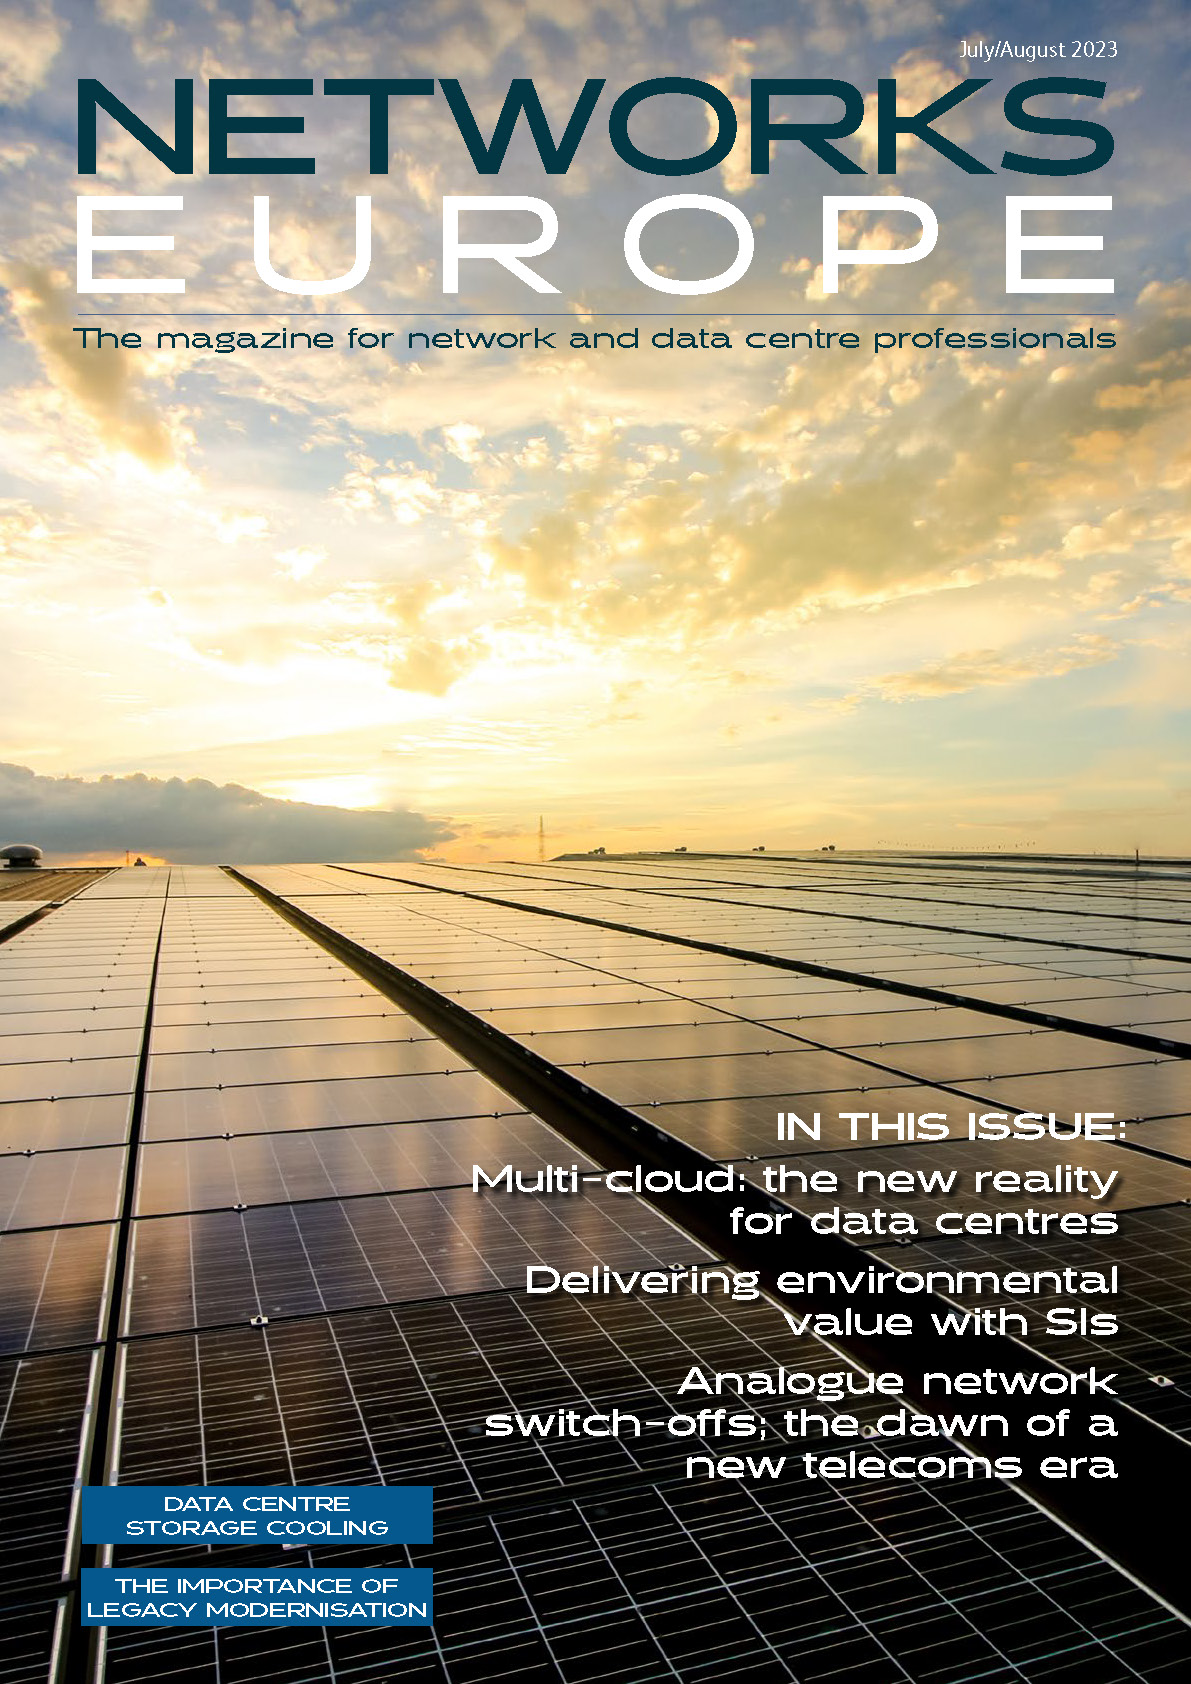 Networks Europe - July/August 2023 Issue